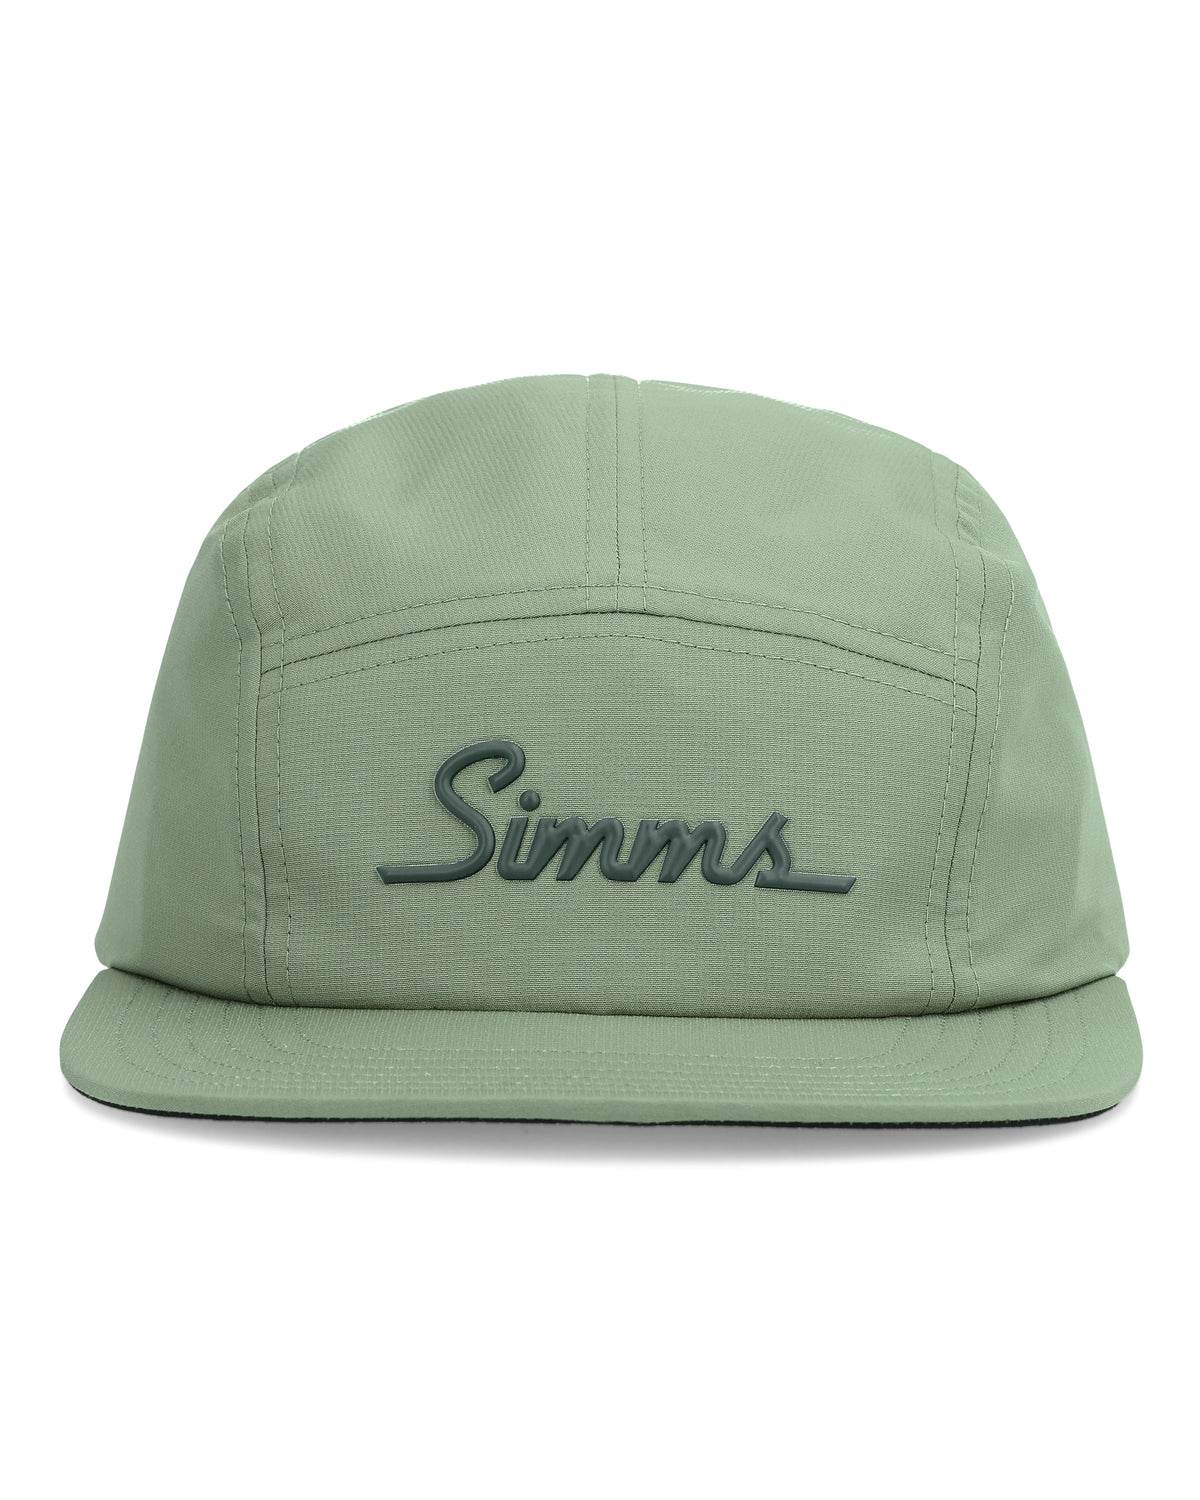 Simms Unstructured Camper Cap — Red's Fly Shop